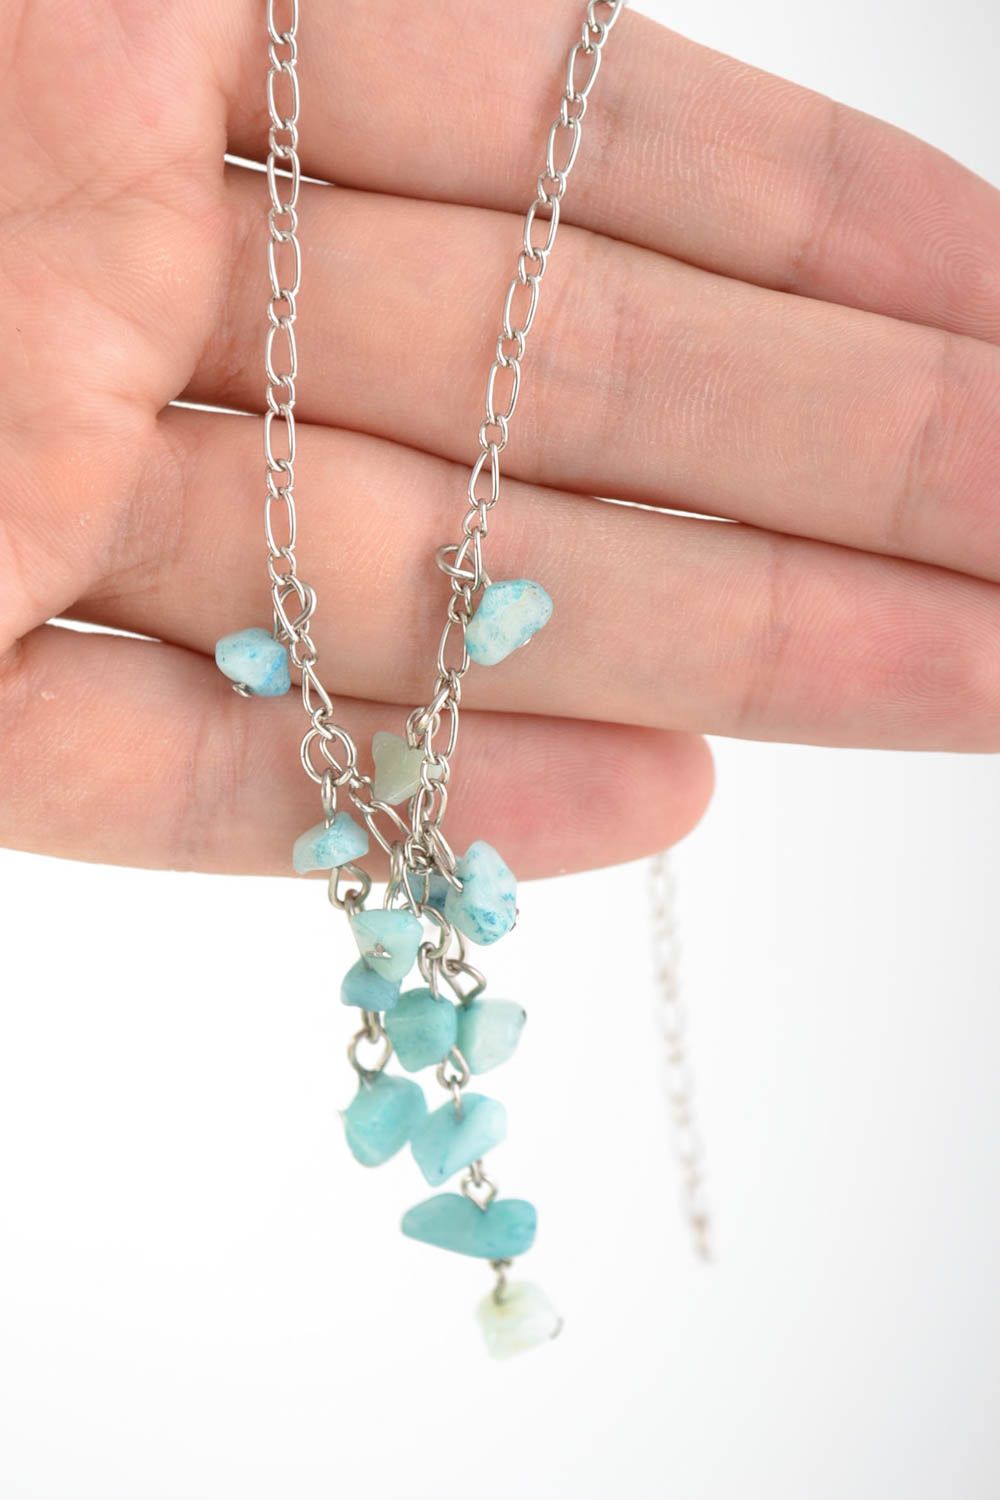 Handmade tender necklace with amazonite stones of turquoise color on metal chain photo 5